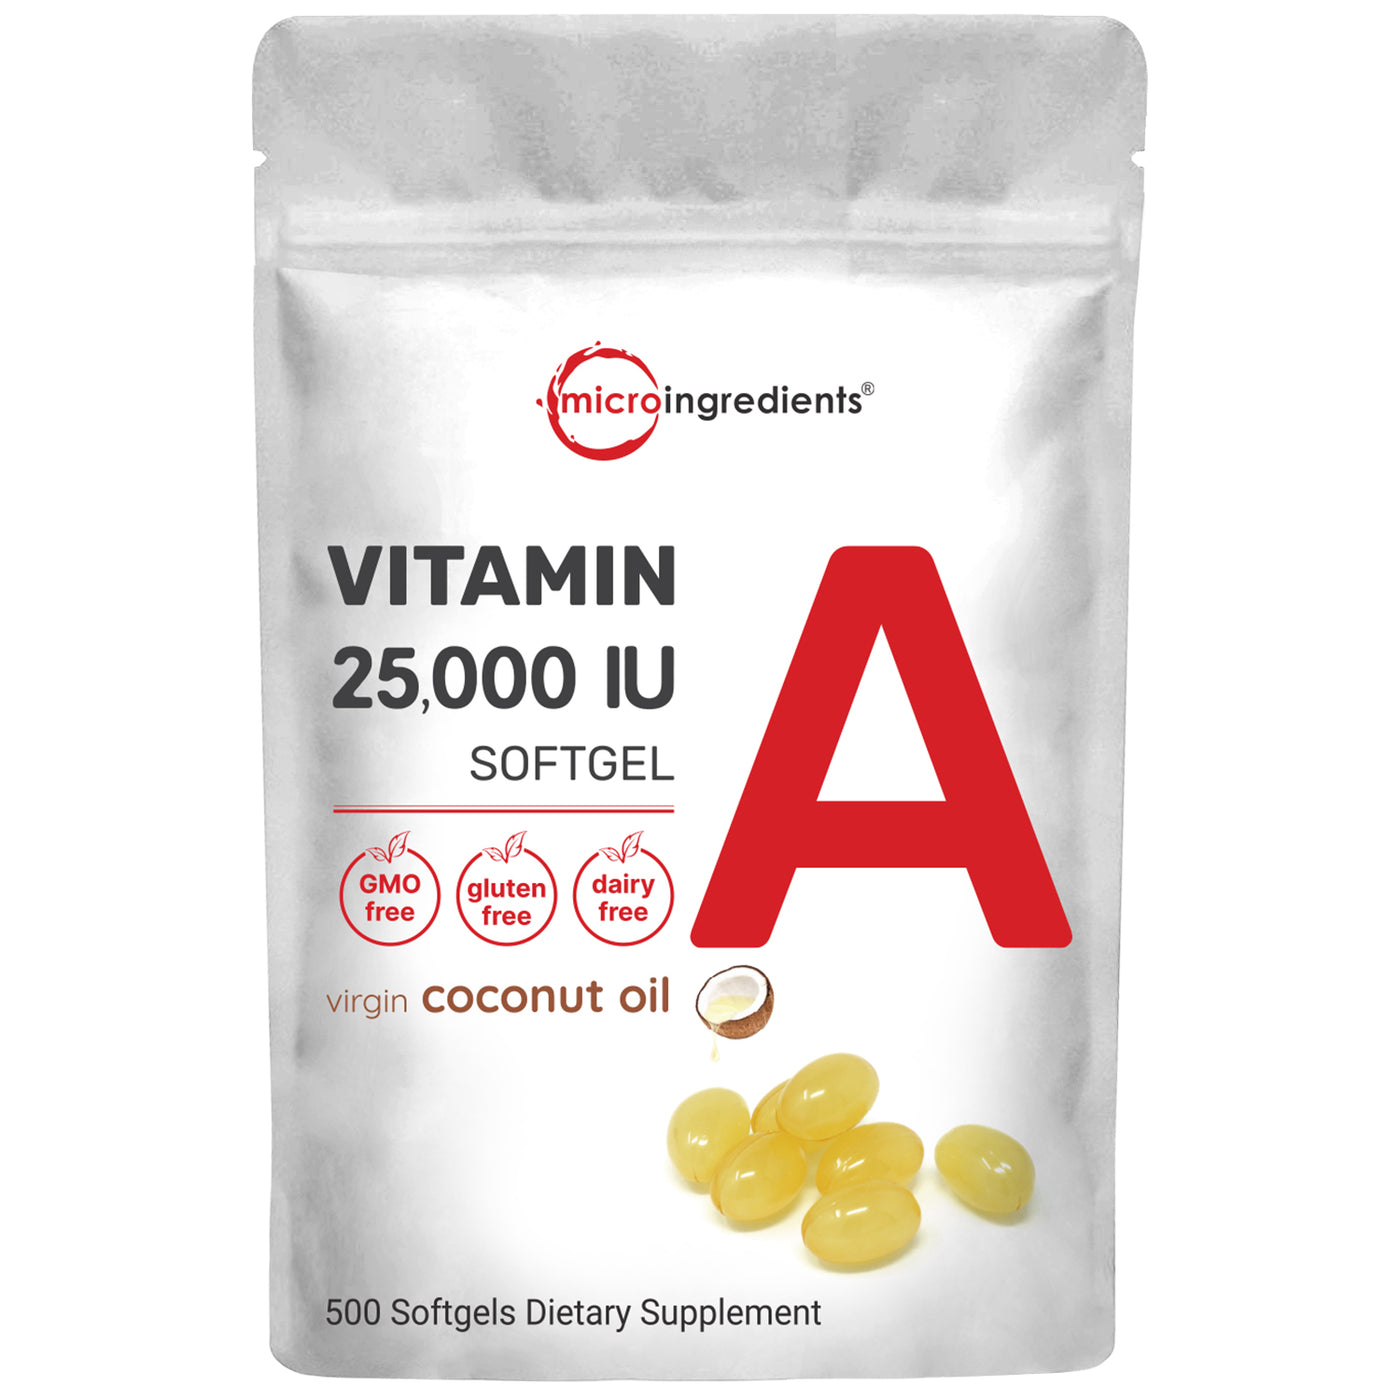 Vitamin A for Acne Relief - 25000 IU with Coconut Oil